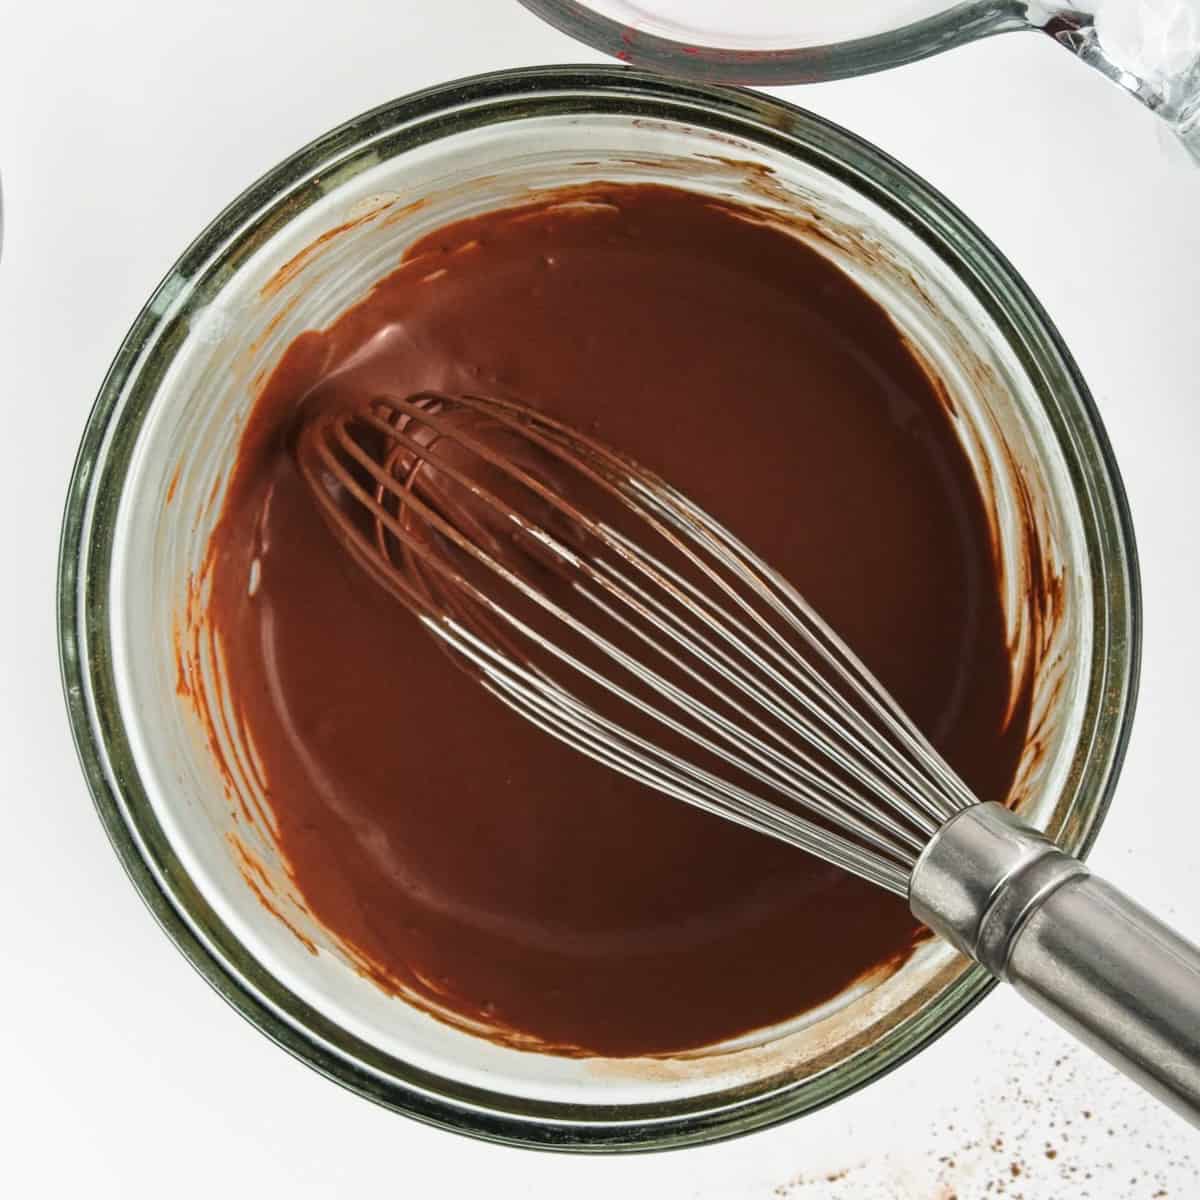 A thick chocolate and coconut milk paste in a bowl with a whisk.